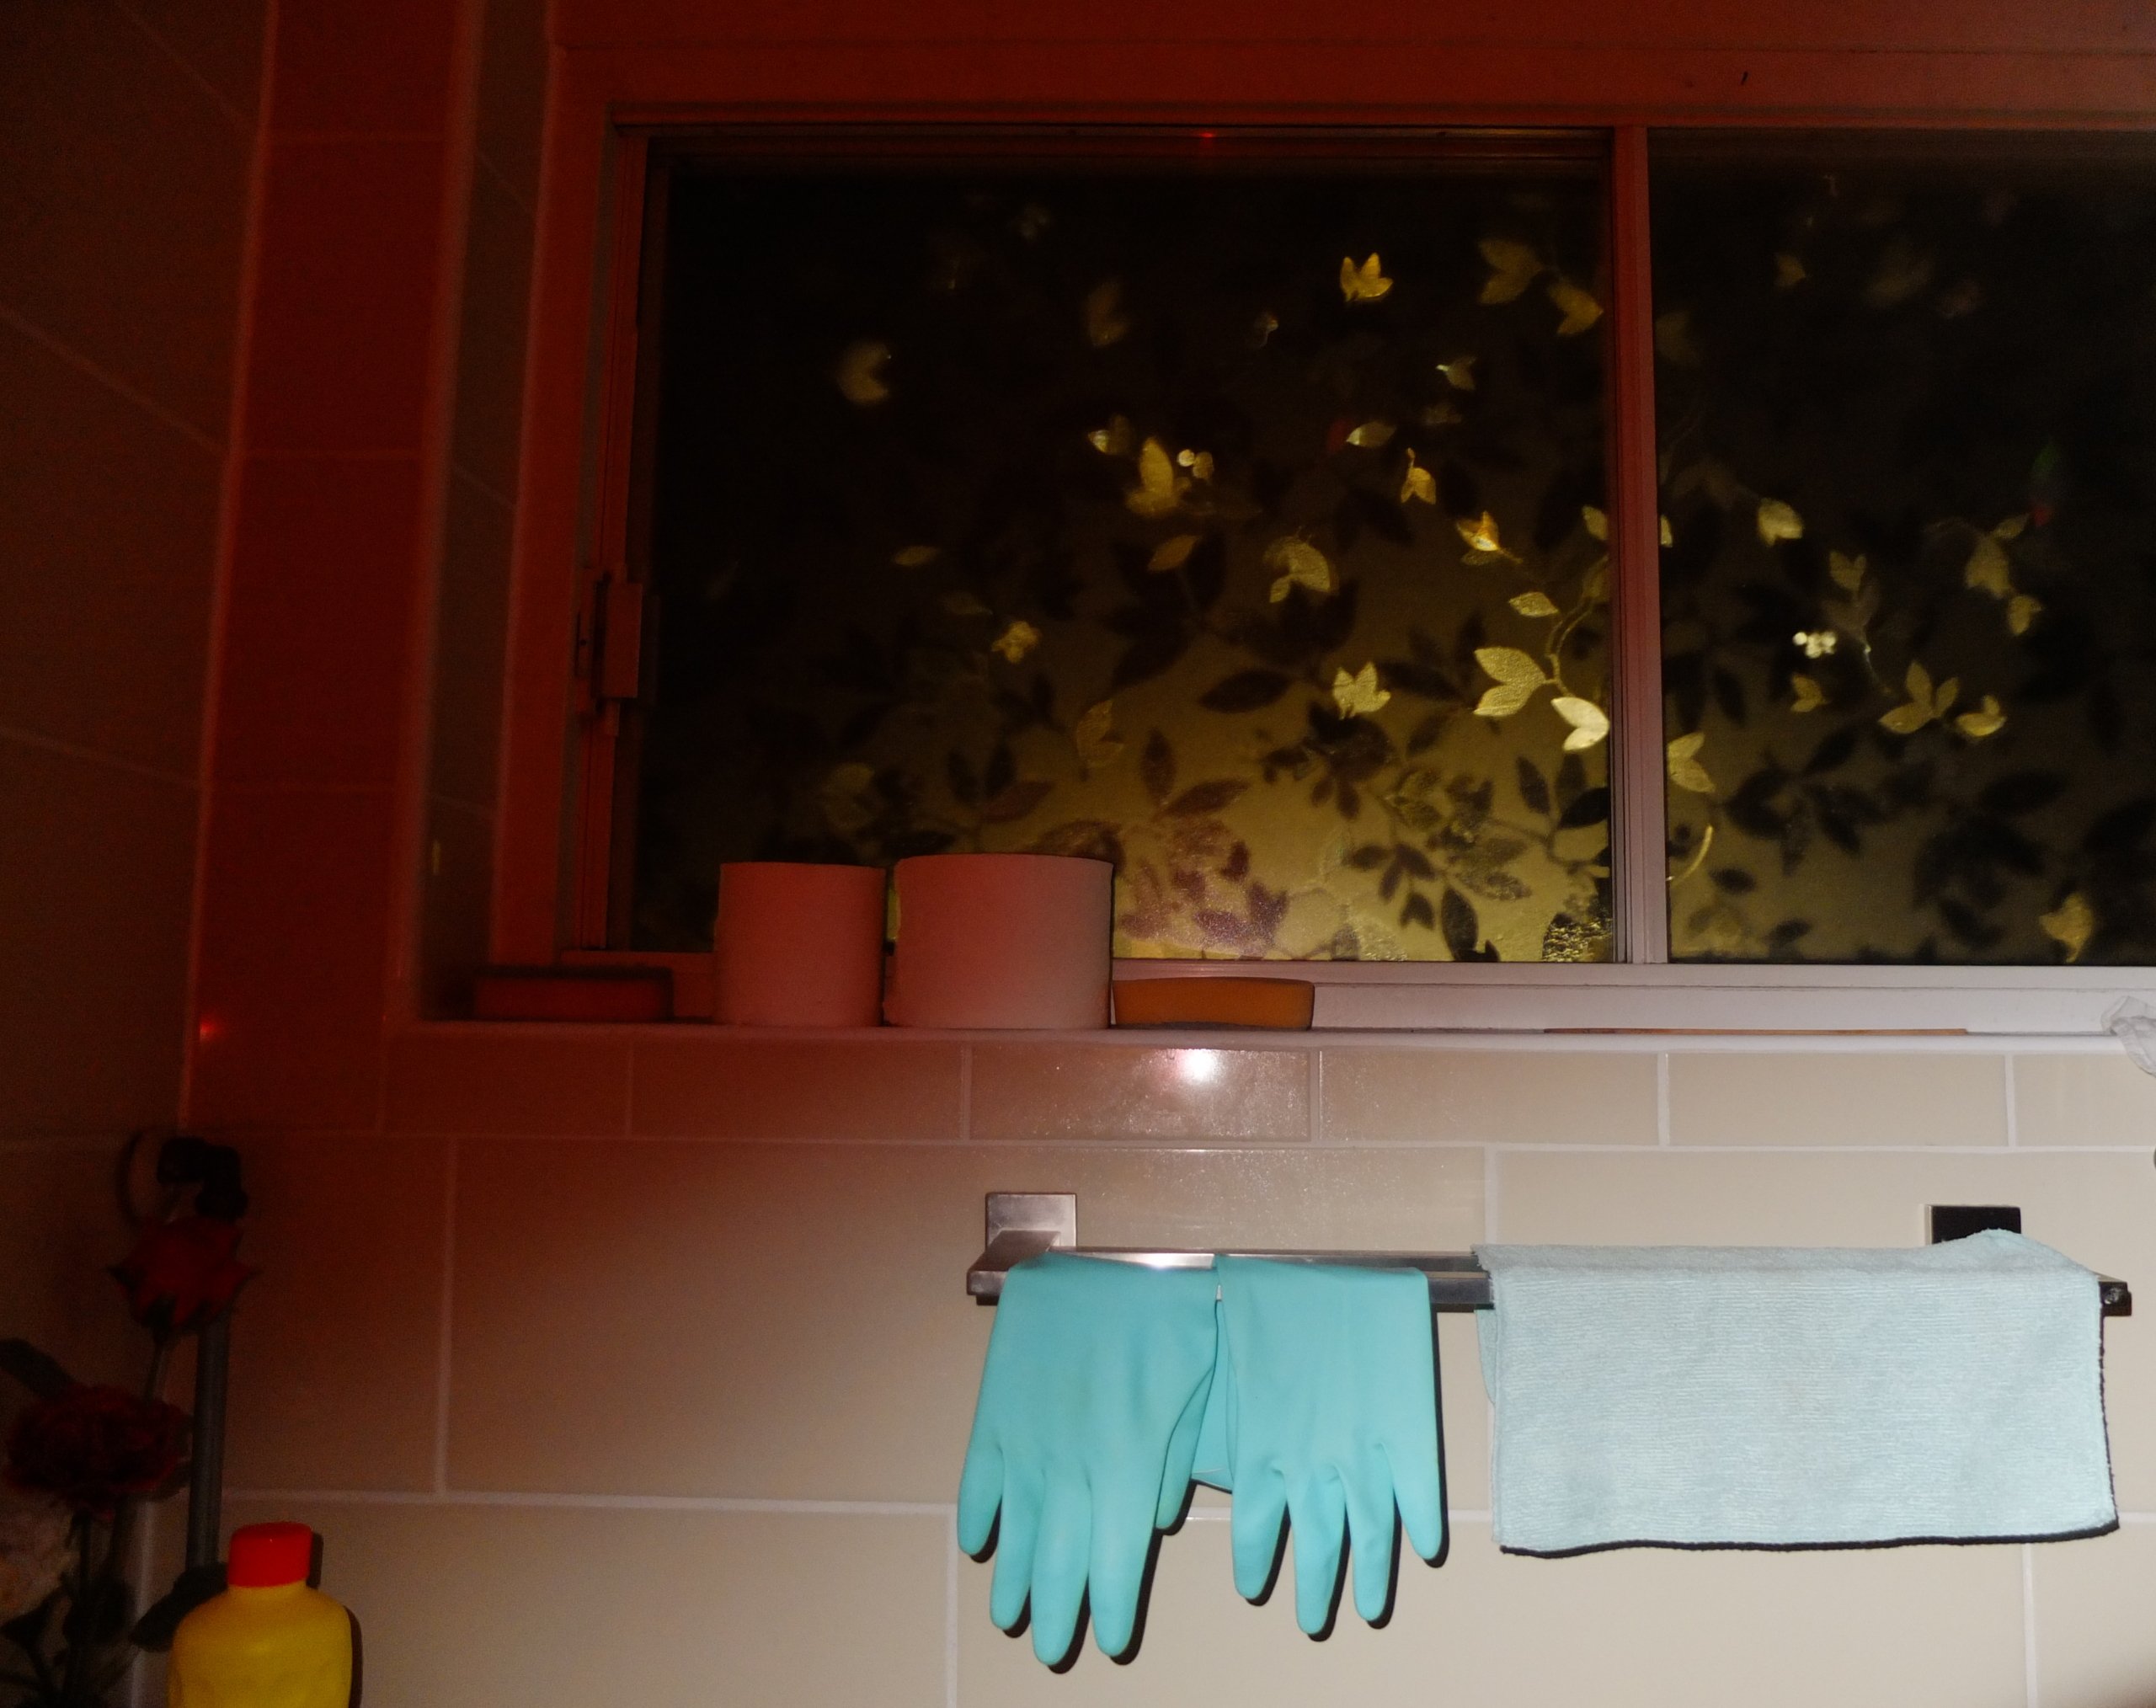 Rubber gloves and a wash cloth hanging on a bathroom rack.